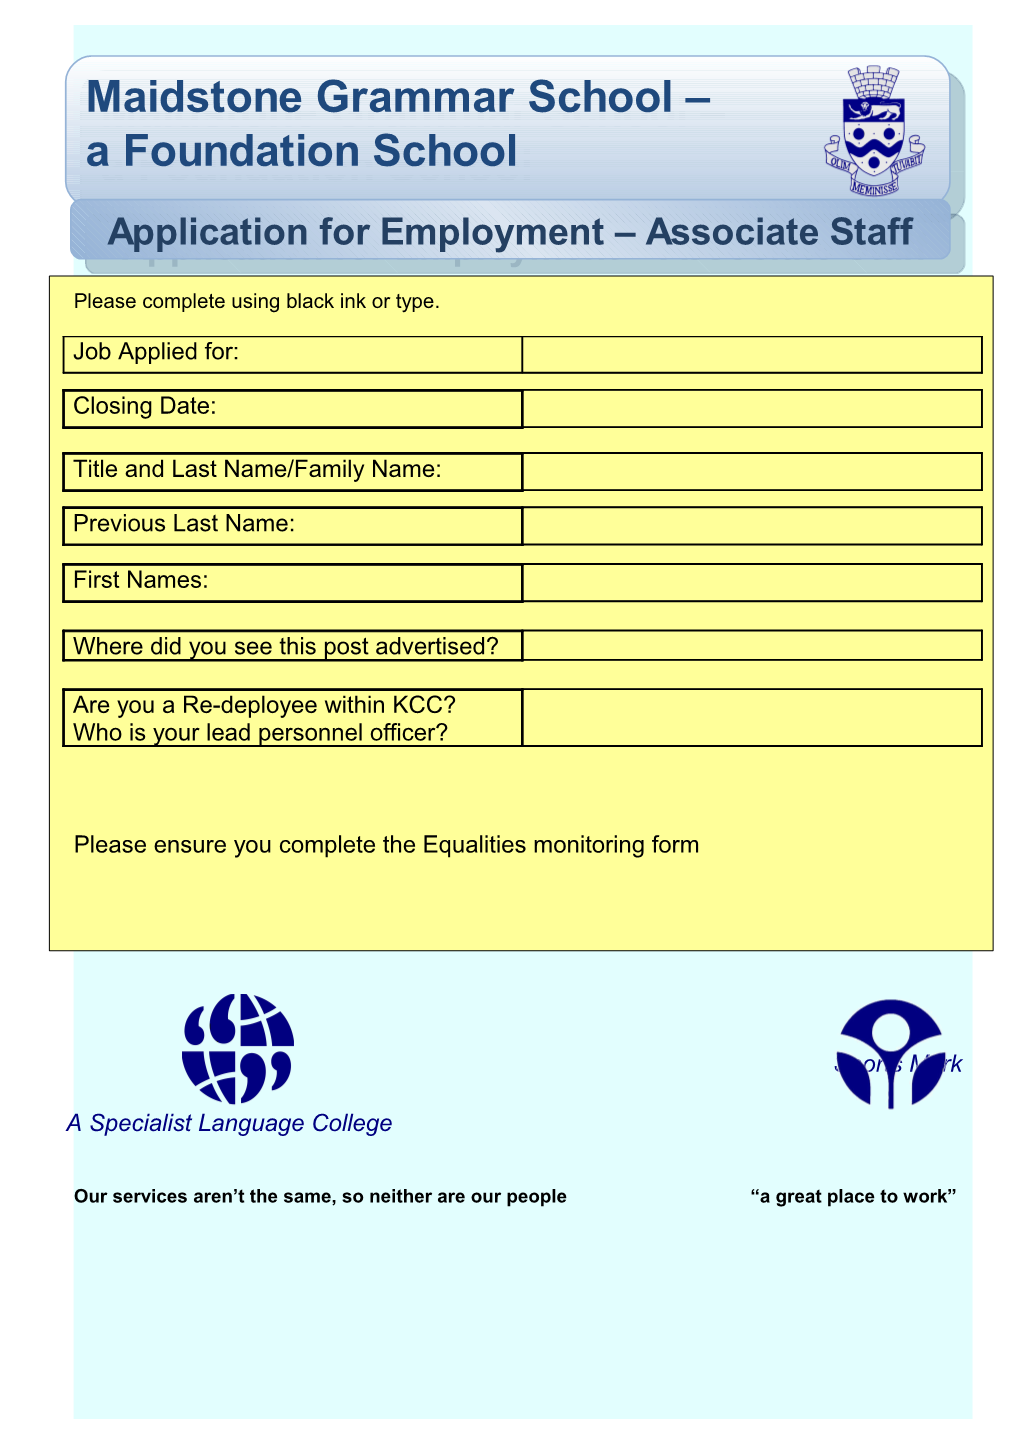 Please Ensure You Complete the Equalities Monitoring Form